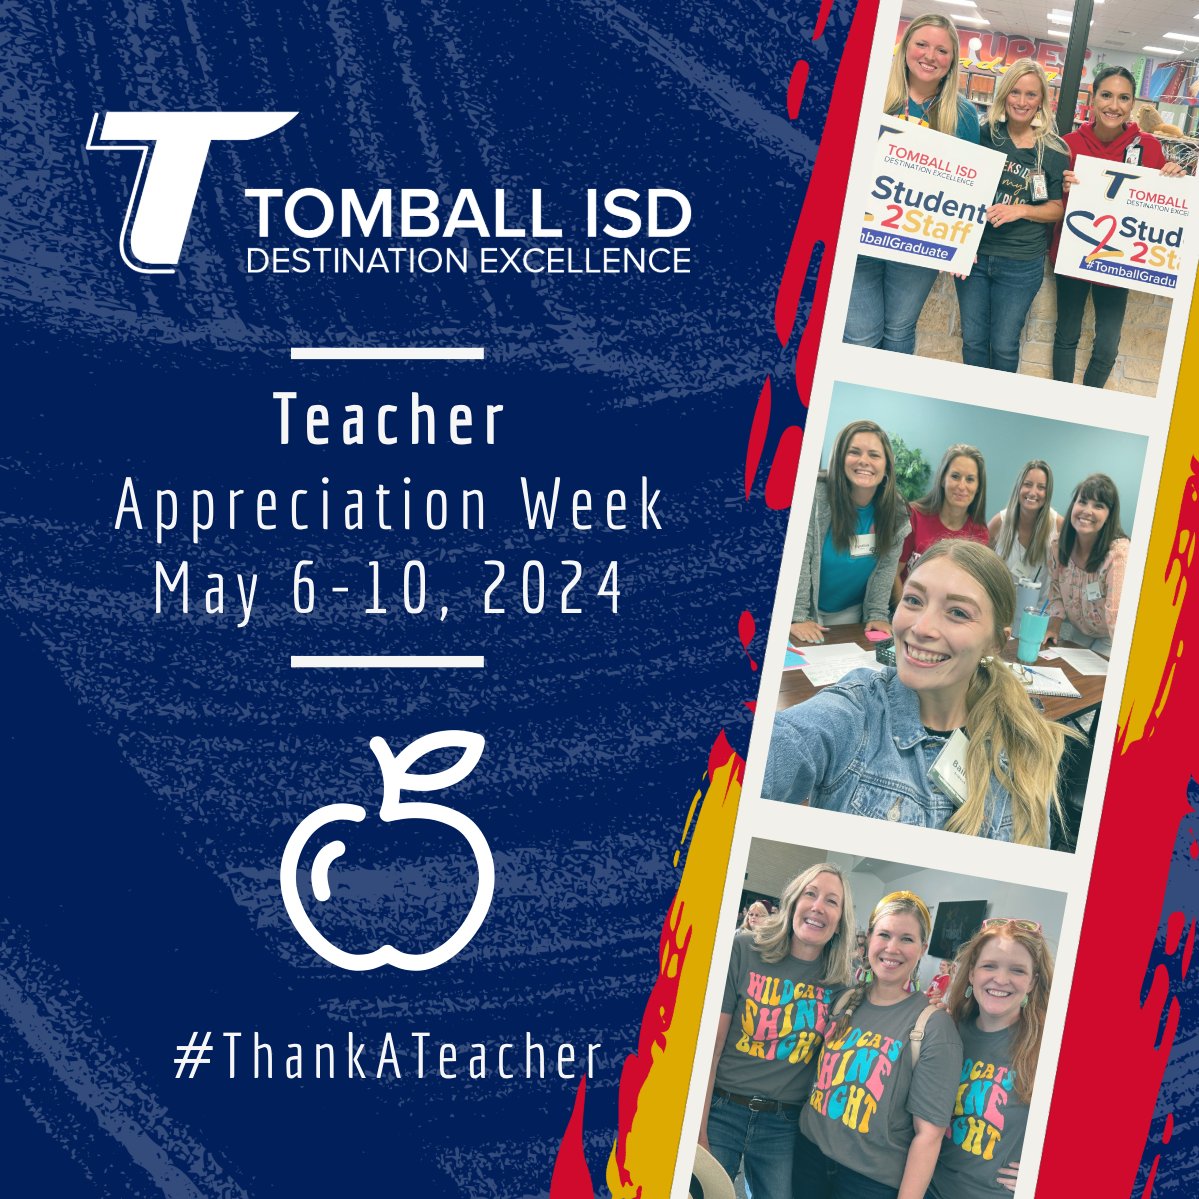 🍎 | Teacher Appreciation Week is coming up, May 6-10, & is always a special week. #ThankATeacher

We look forward to celebrating our teachers!

As we prepare, we need your help! Share in the link below why your teacher is the best! #DestinationExcellence

tomballisd.net/community/teac…